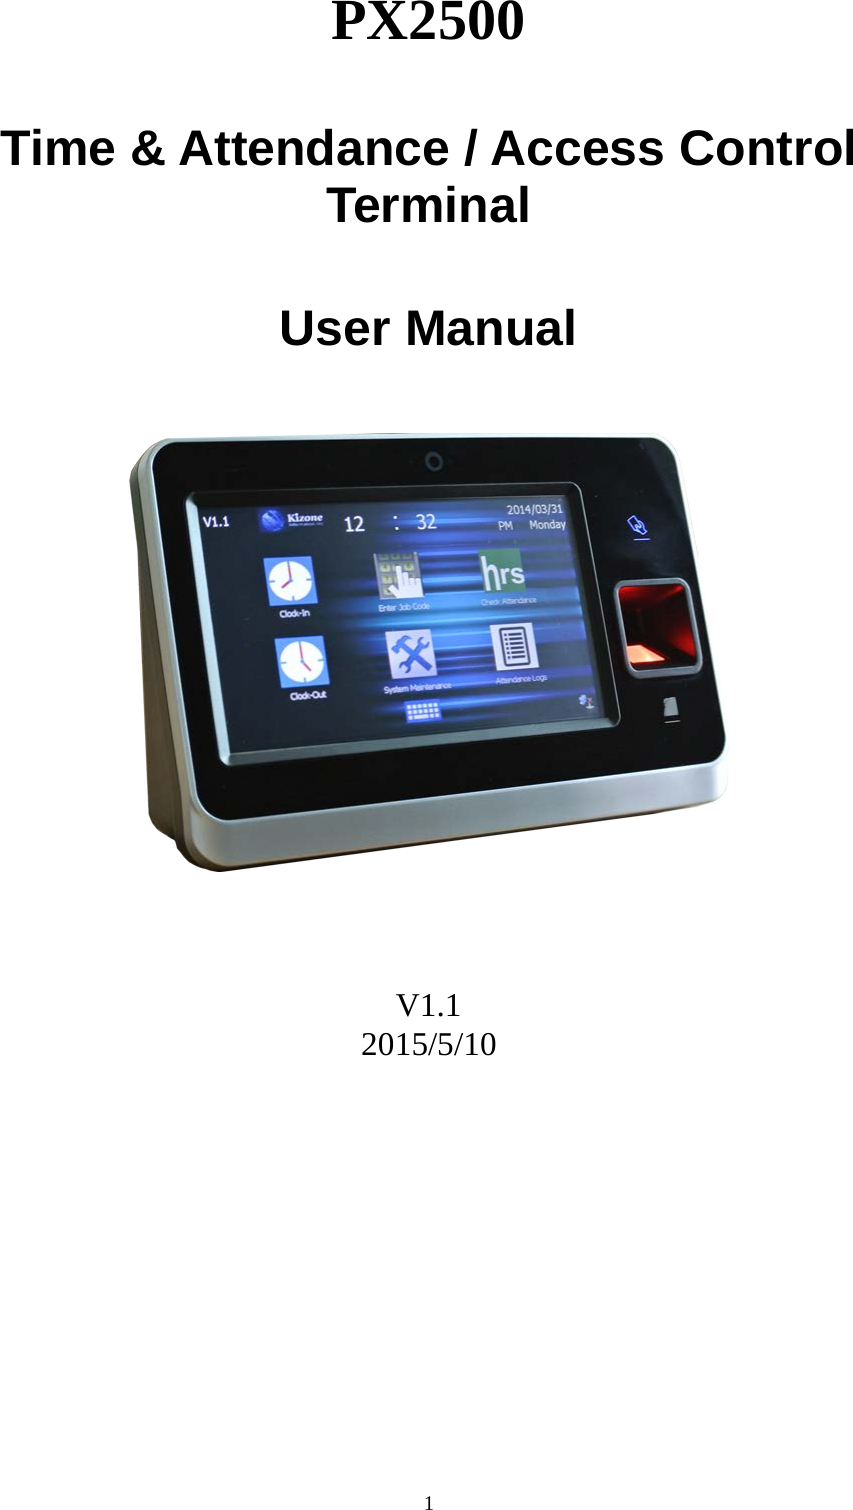   1 PX2500  Time &amp; Attendance / Access Control Terminal  User Manual         V1.1 2015/5/10                    